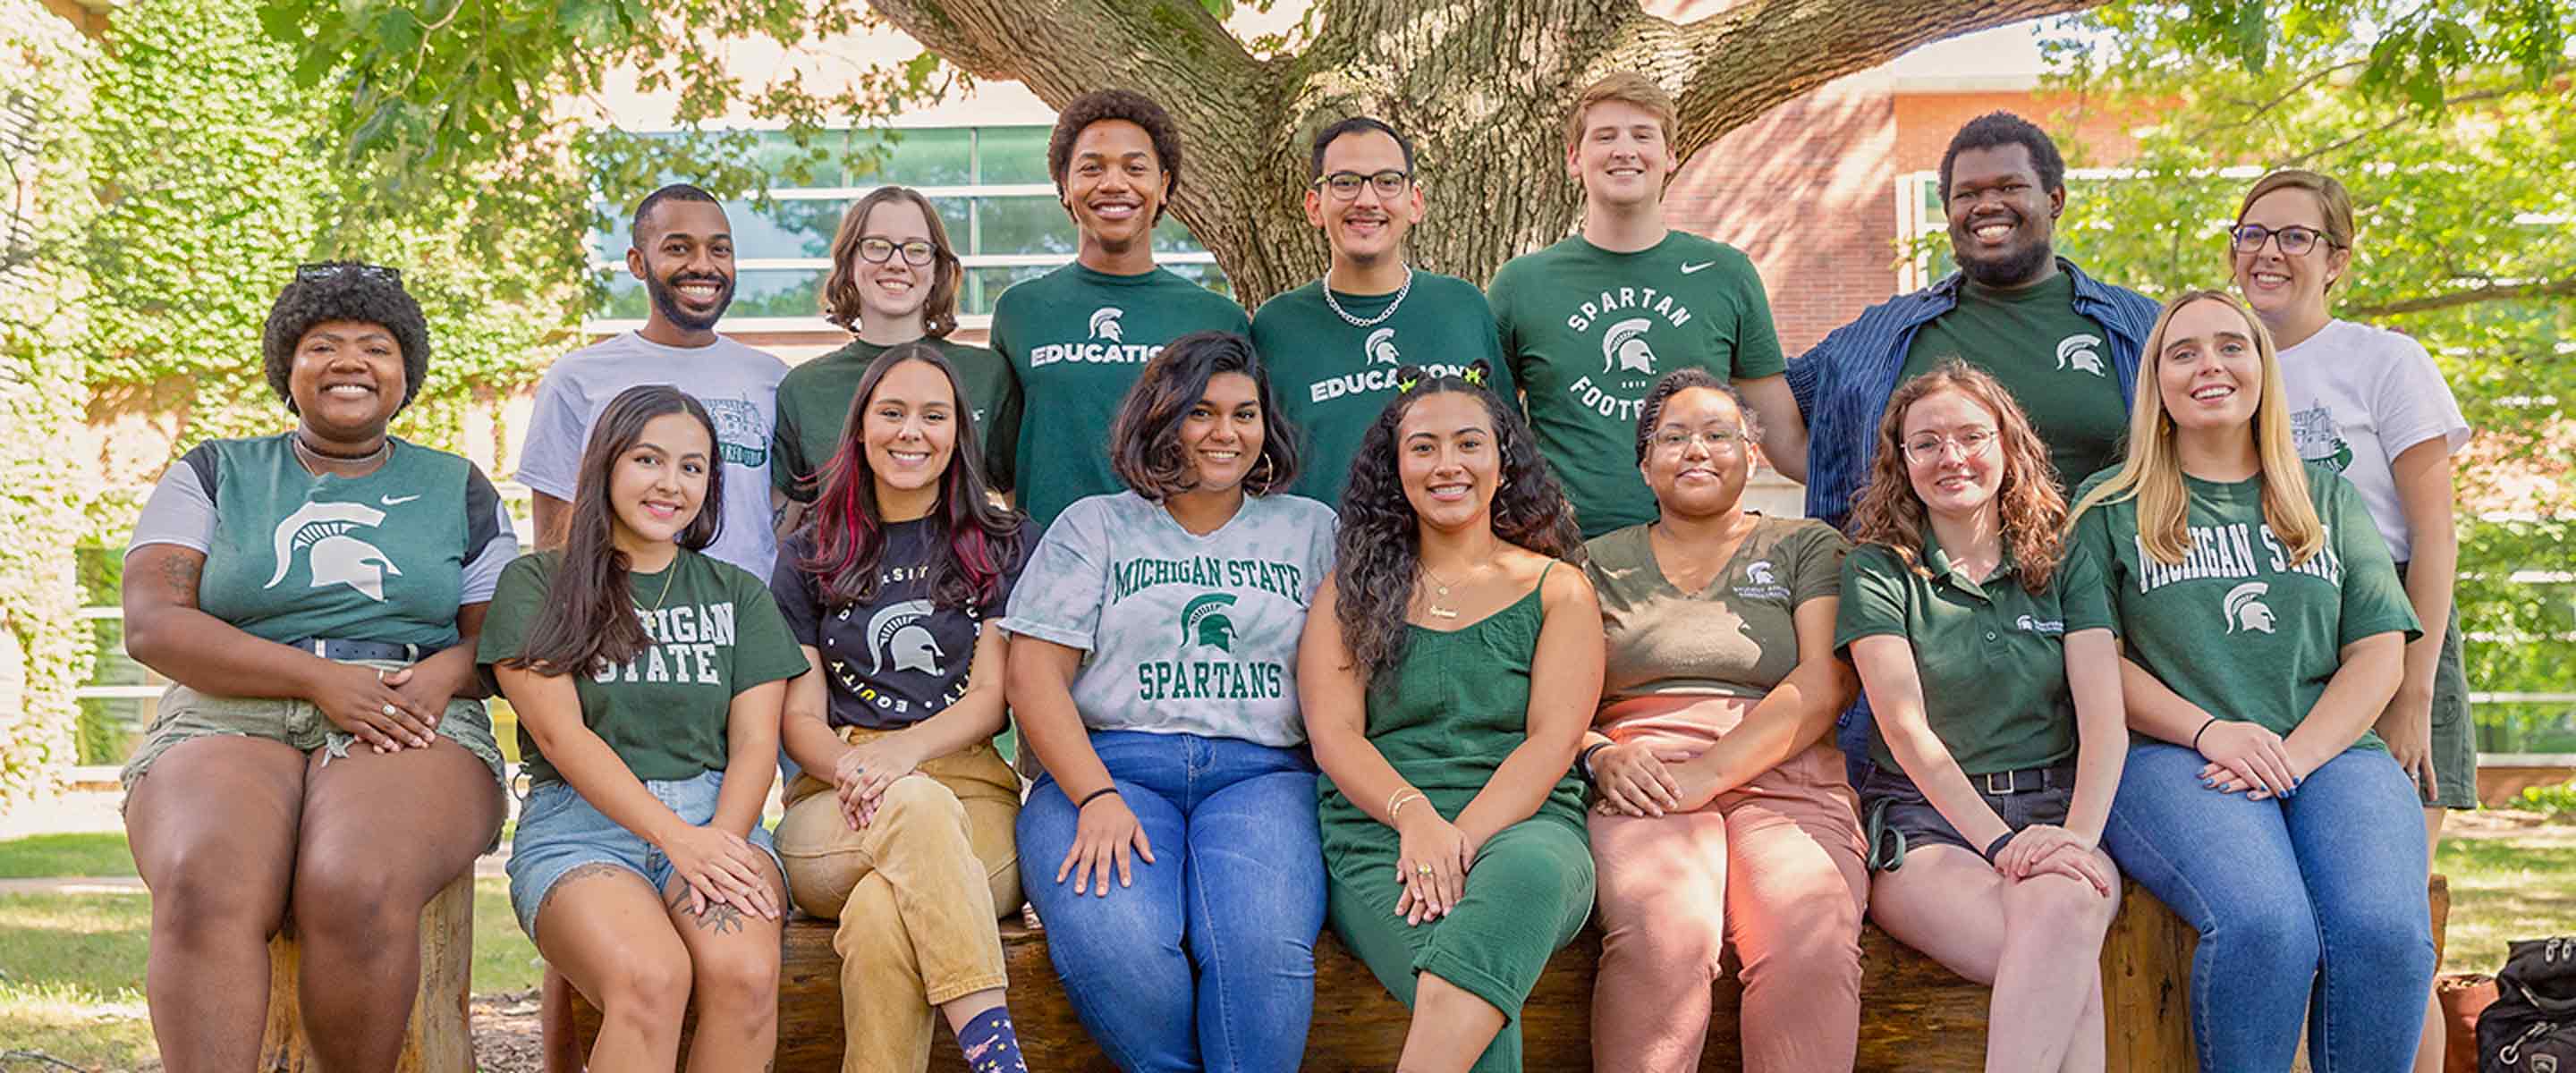 A diverse group of individuals is posed together, smiling, on a wooden bench structure outdoors. Many wear shirts in varying designs, all sporting the Michigan State Spartans logo, suggesting they are students or supporters of the institution. The group is framed by lush greenery and the trunk of a large tree, indicative of a campus setting. They appear to be relaxed and happy, conveying a sense of camaraderie and school spirit. The arrangement of the individuals, casual clothing, and the university insignia emphasize a collegiate atmosphere and possibly a student group or team.